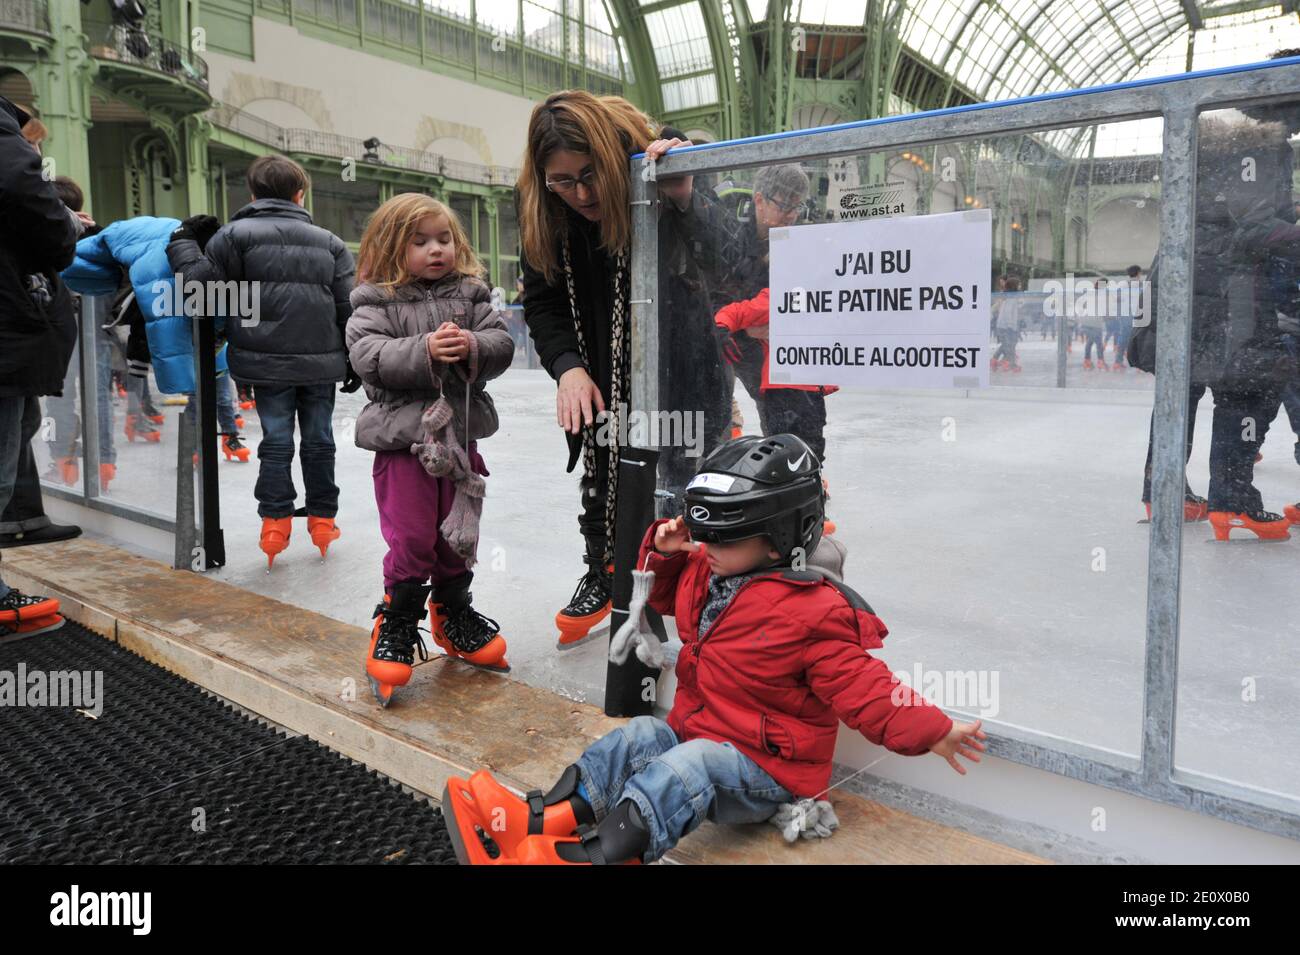 Visitors ice-skate on a giant rink hosted in the glass-roofed central hall of the Grand Palais, in Paris, France, on December 12, 2012. The rink who is the largest rink ever created in France is 1,800 square meters large and can receive 1000 people at the same time. Photo by Christophe Guibbaud/ABACAPRESS.COM. Stock Photo